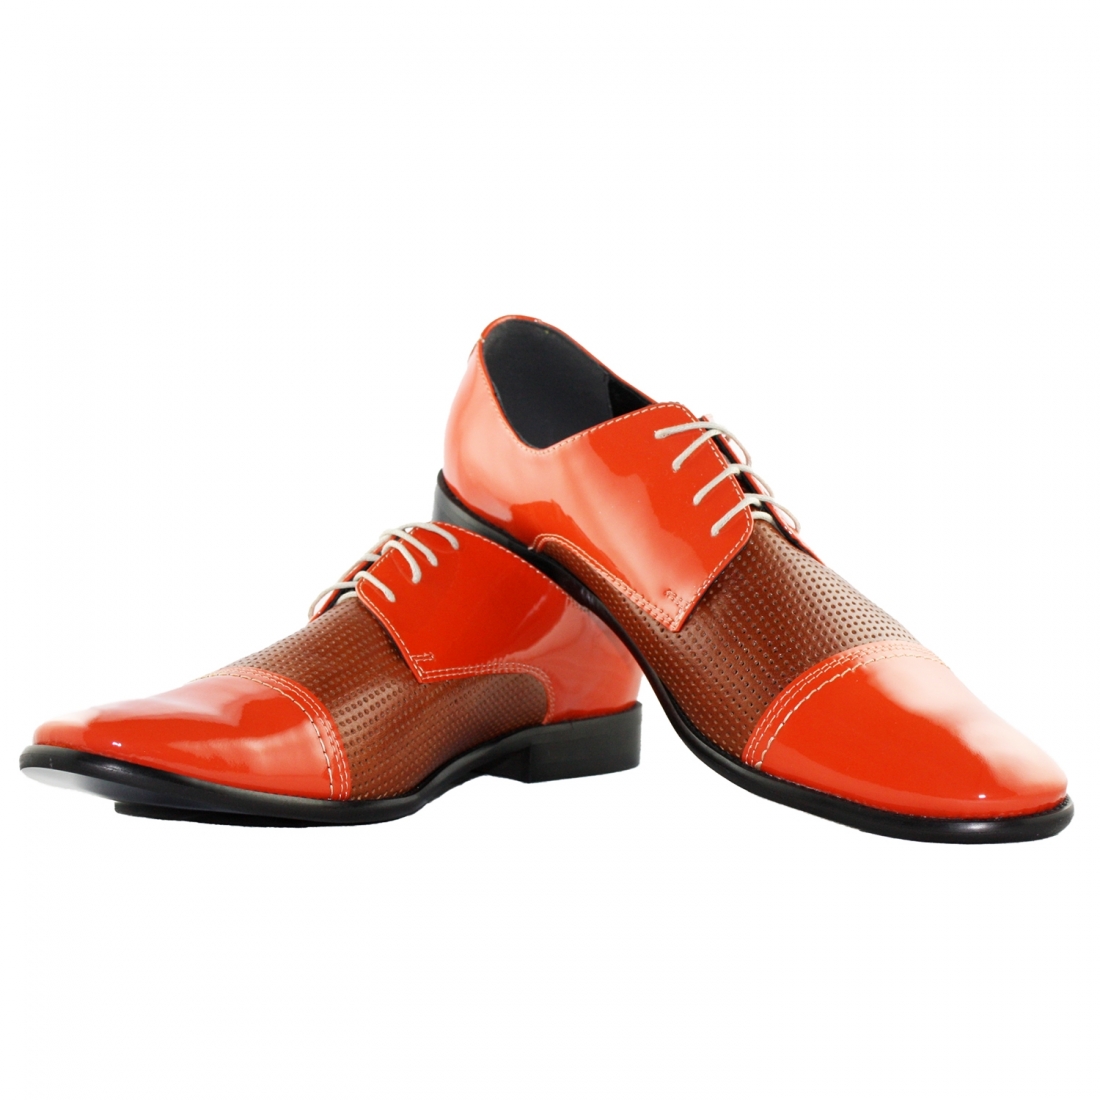 Modello Soterone - Classic Shoes - Handmade Colorful Italian Leather Shoes